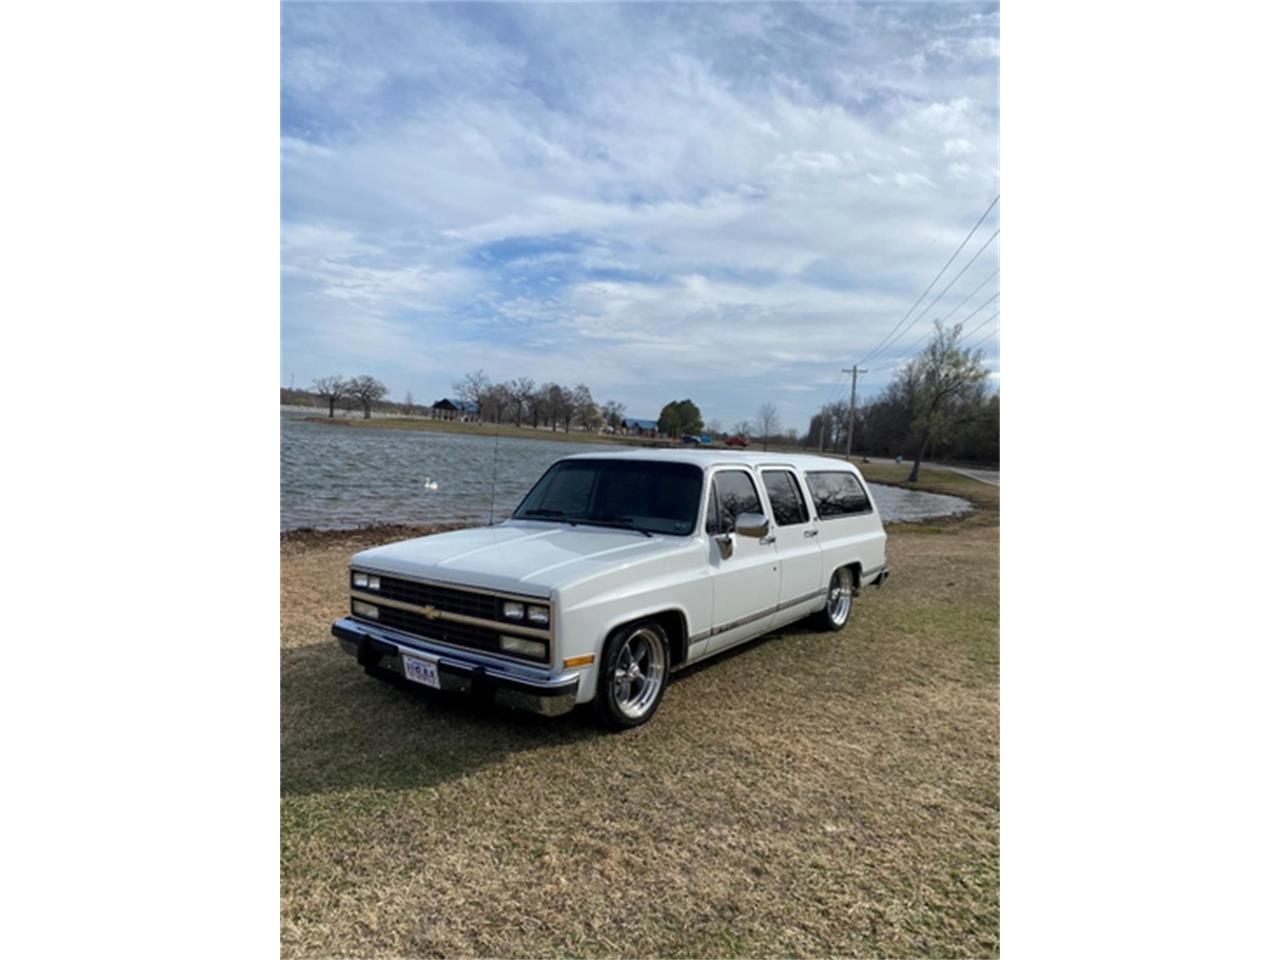 For Sale at Auction: 1991 Chevrolet Suburban in Shawnee, Oklahoma for sale in Shawnee, OK